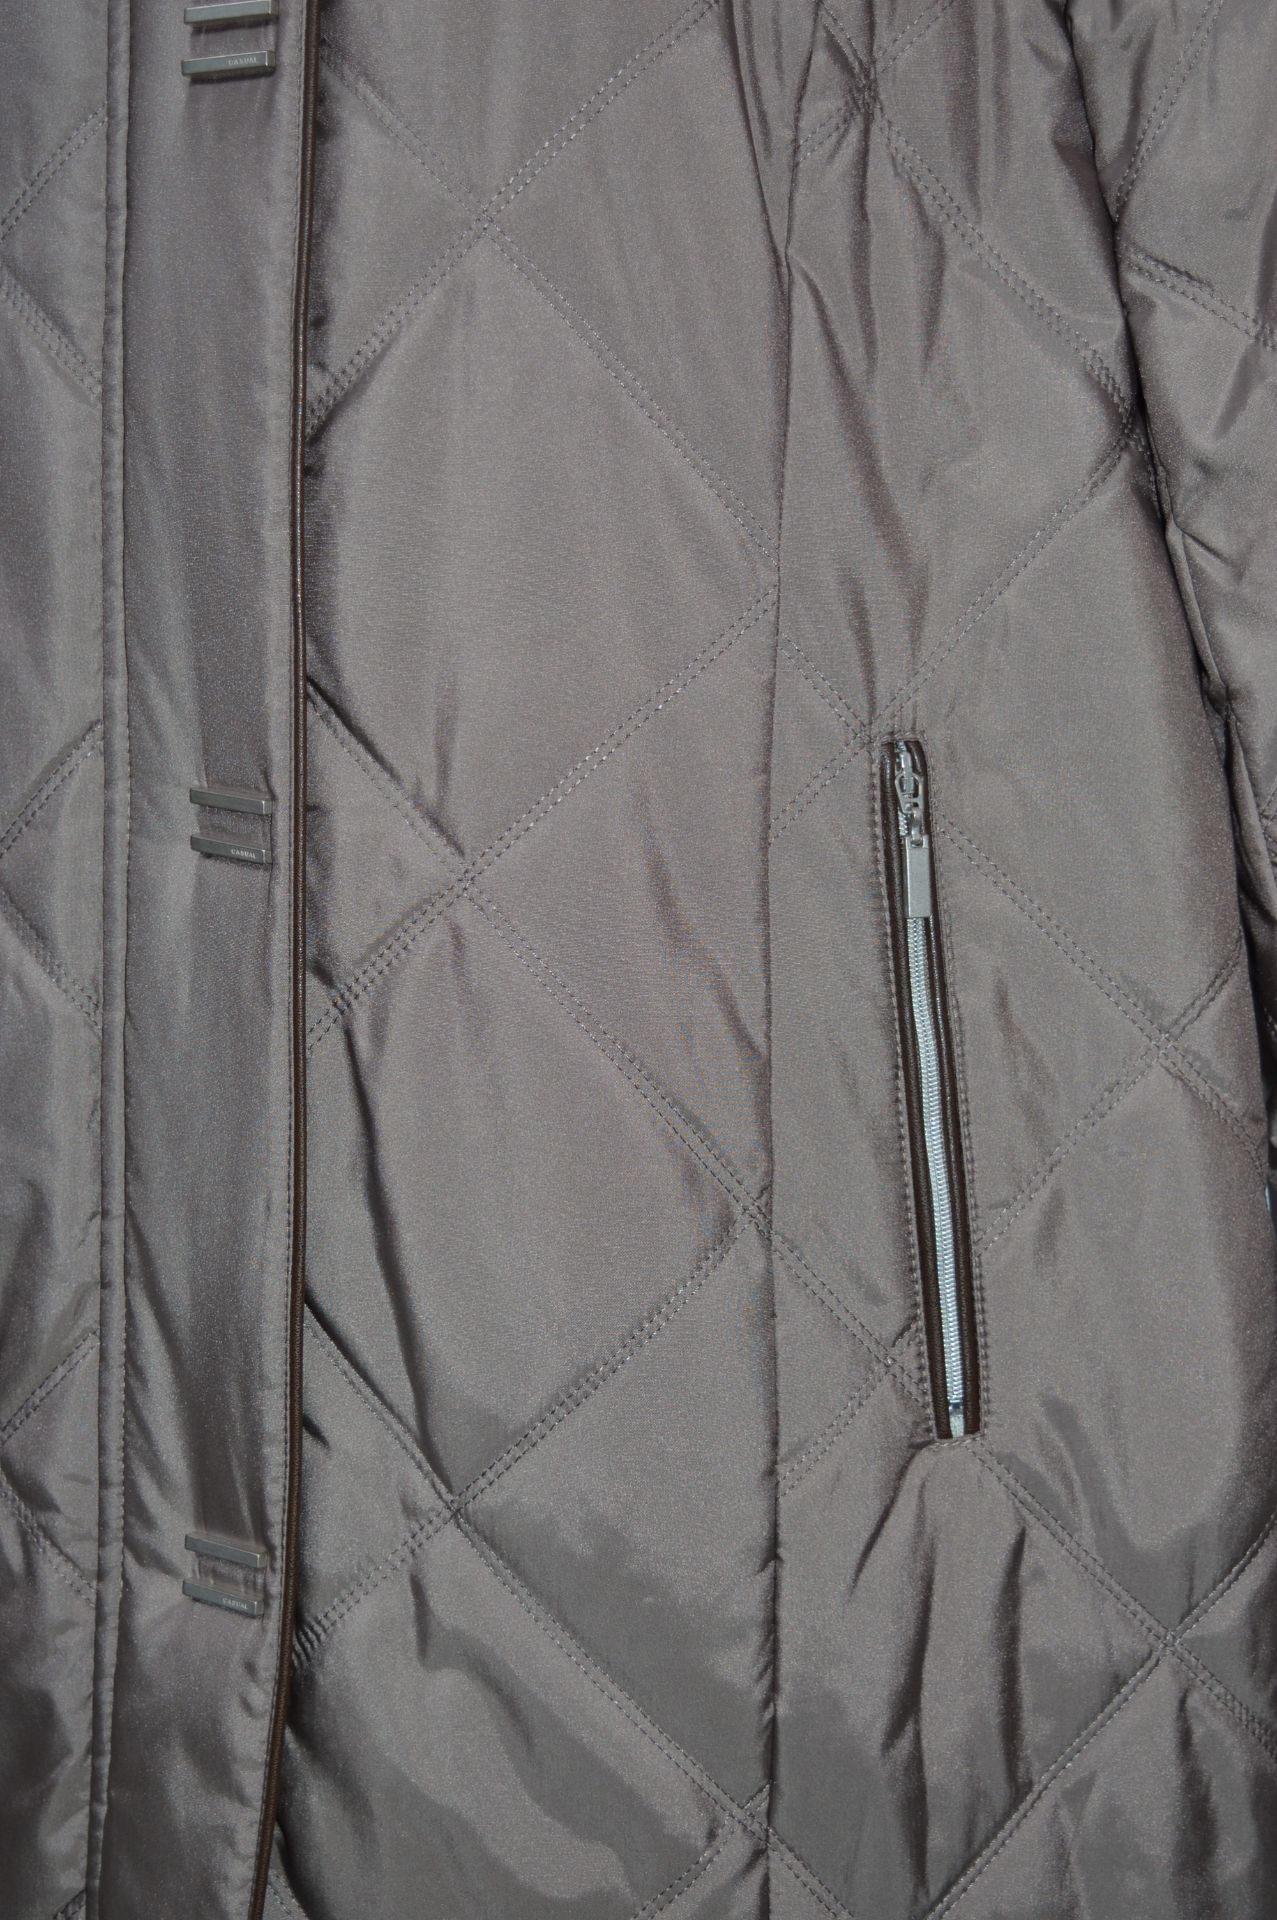 1 x Steilmann KSTN By Kirsten Womens Coat - Padded Coat With Functional Pockets, Inner Pocket and - Image 3 of 12